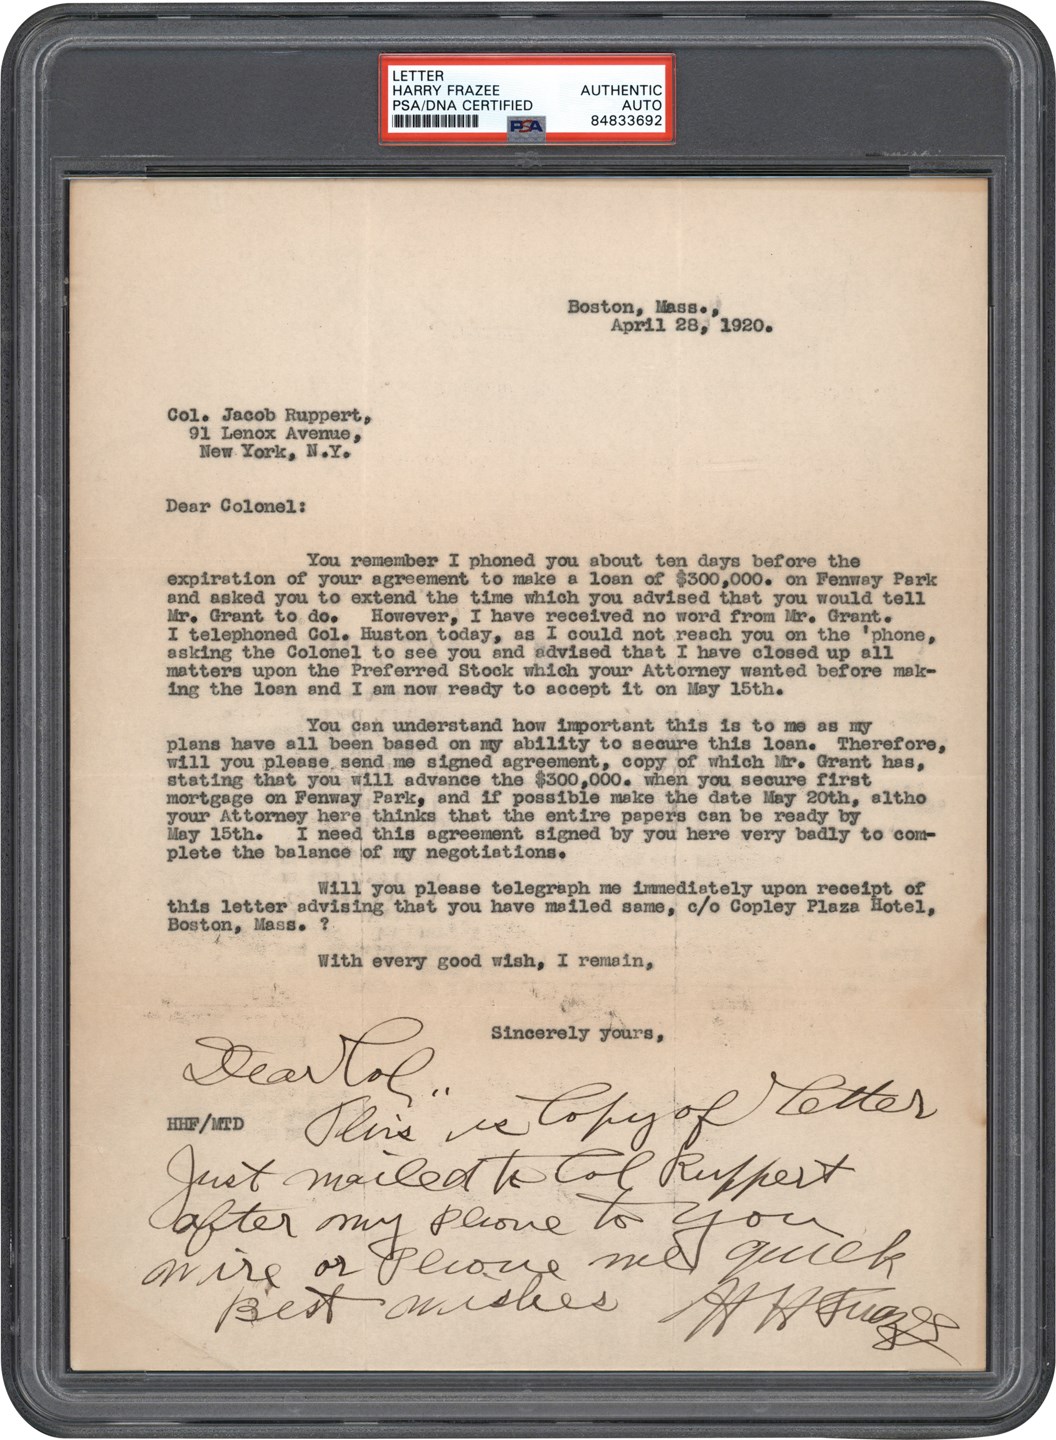 The Babe Ruth Sale Archive - 1920 Harry Frazee Desperation Letter to Colonel Tillinghast Huston Regarding $300,000 Loan Connected to the Babe Ruth Sale - From The Barry Halper Collection (PSA)